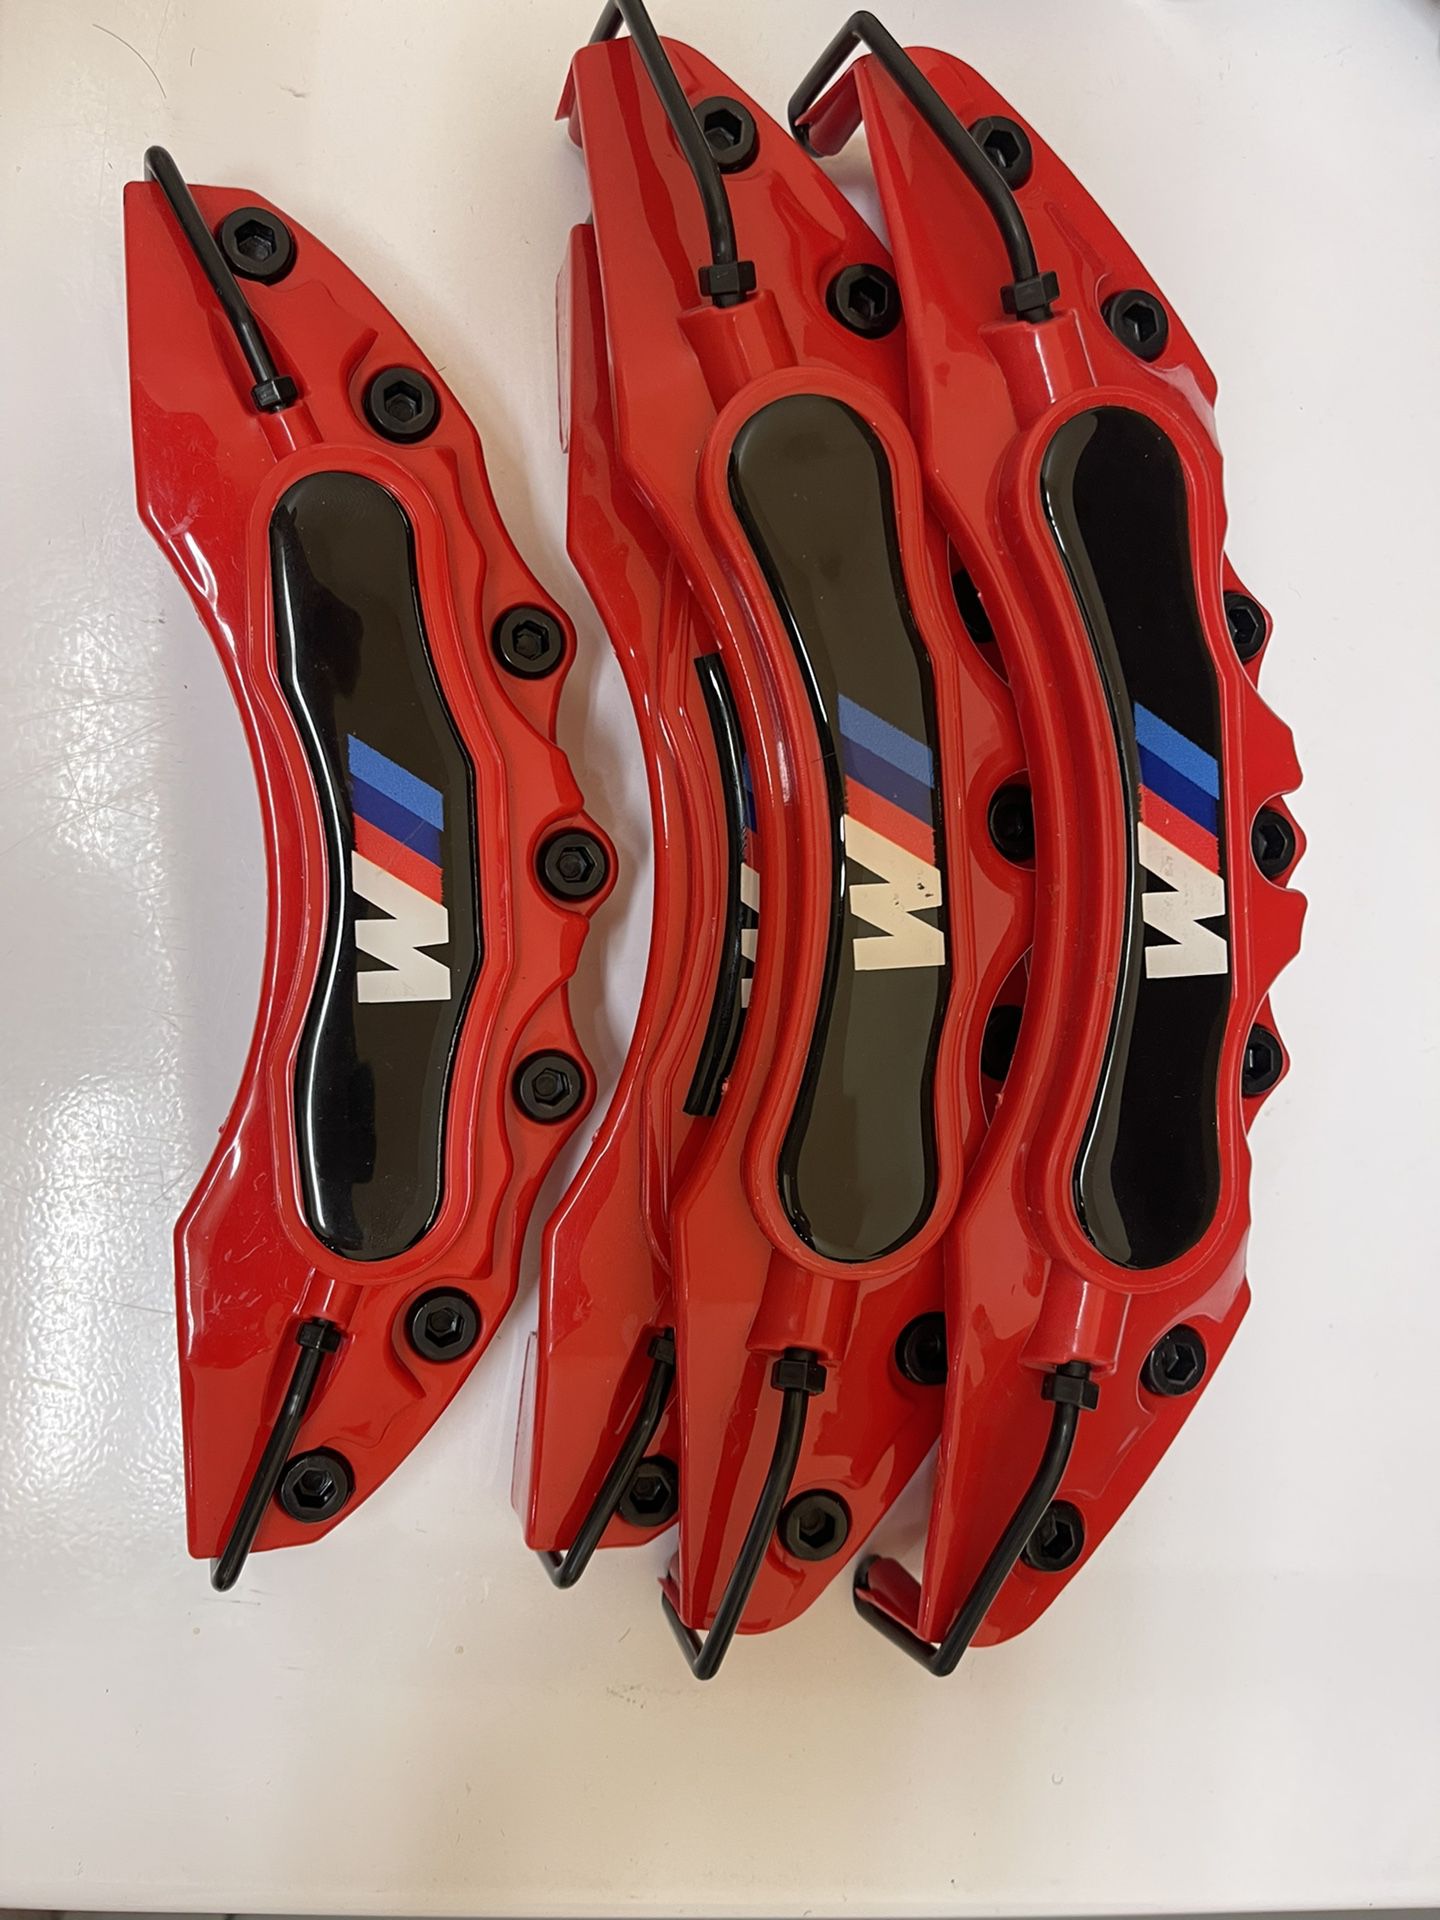 Bmw M Calipers Covers Fit Most BMW’s 